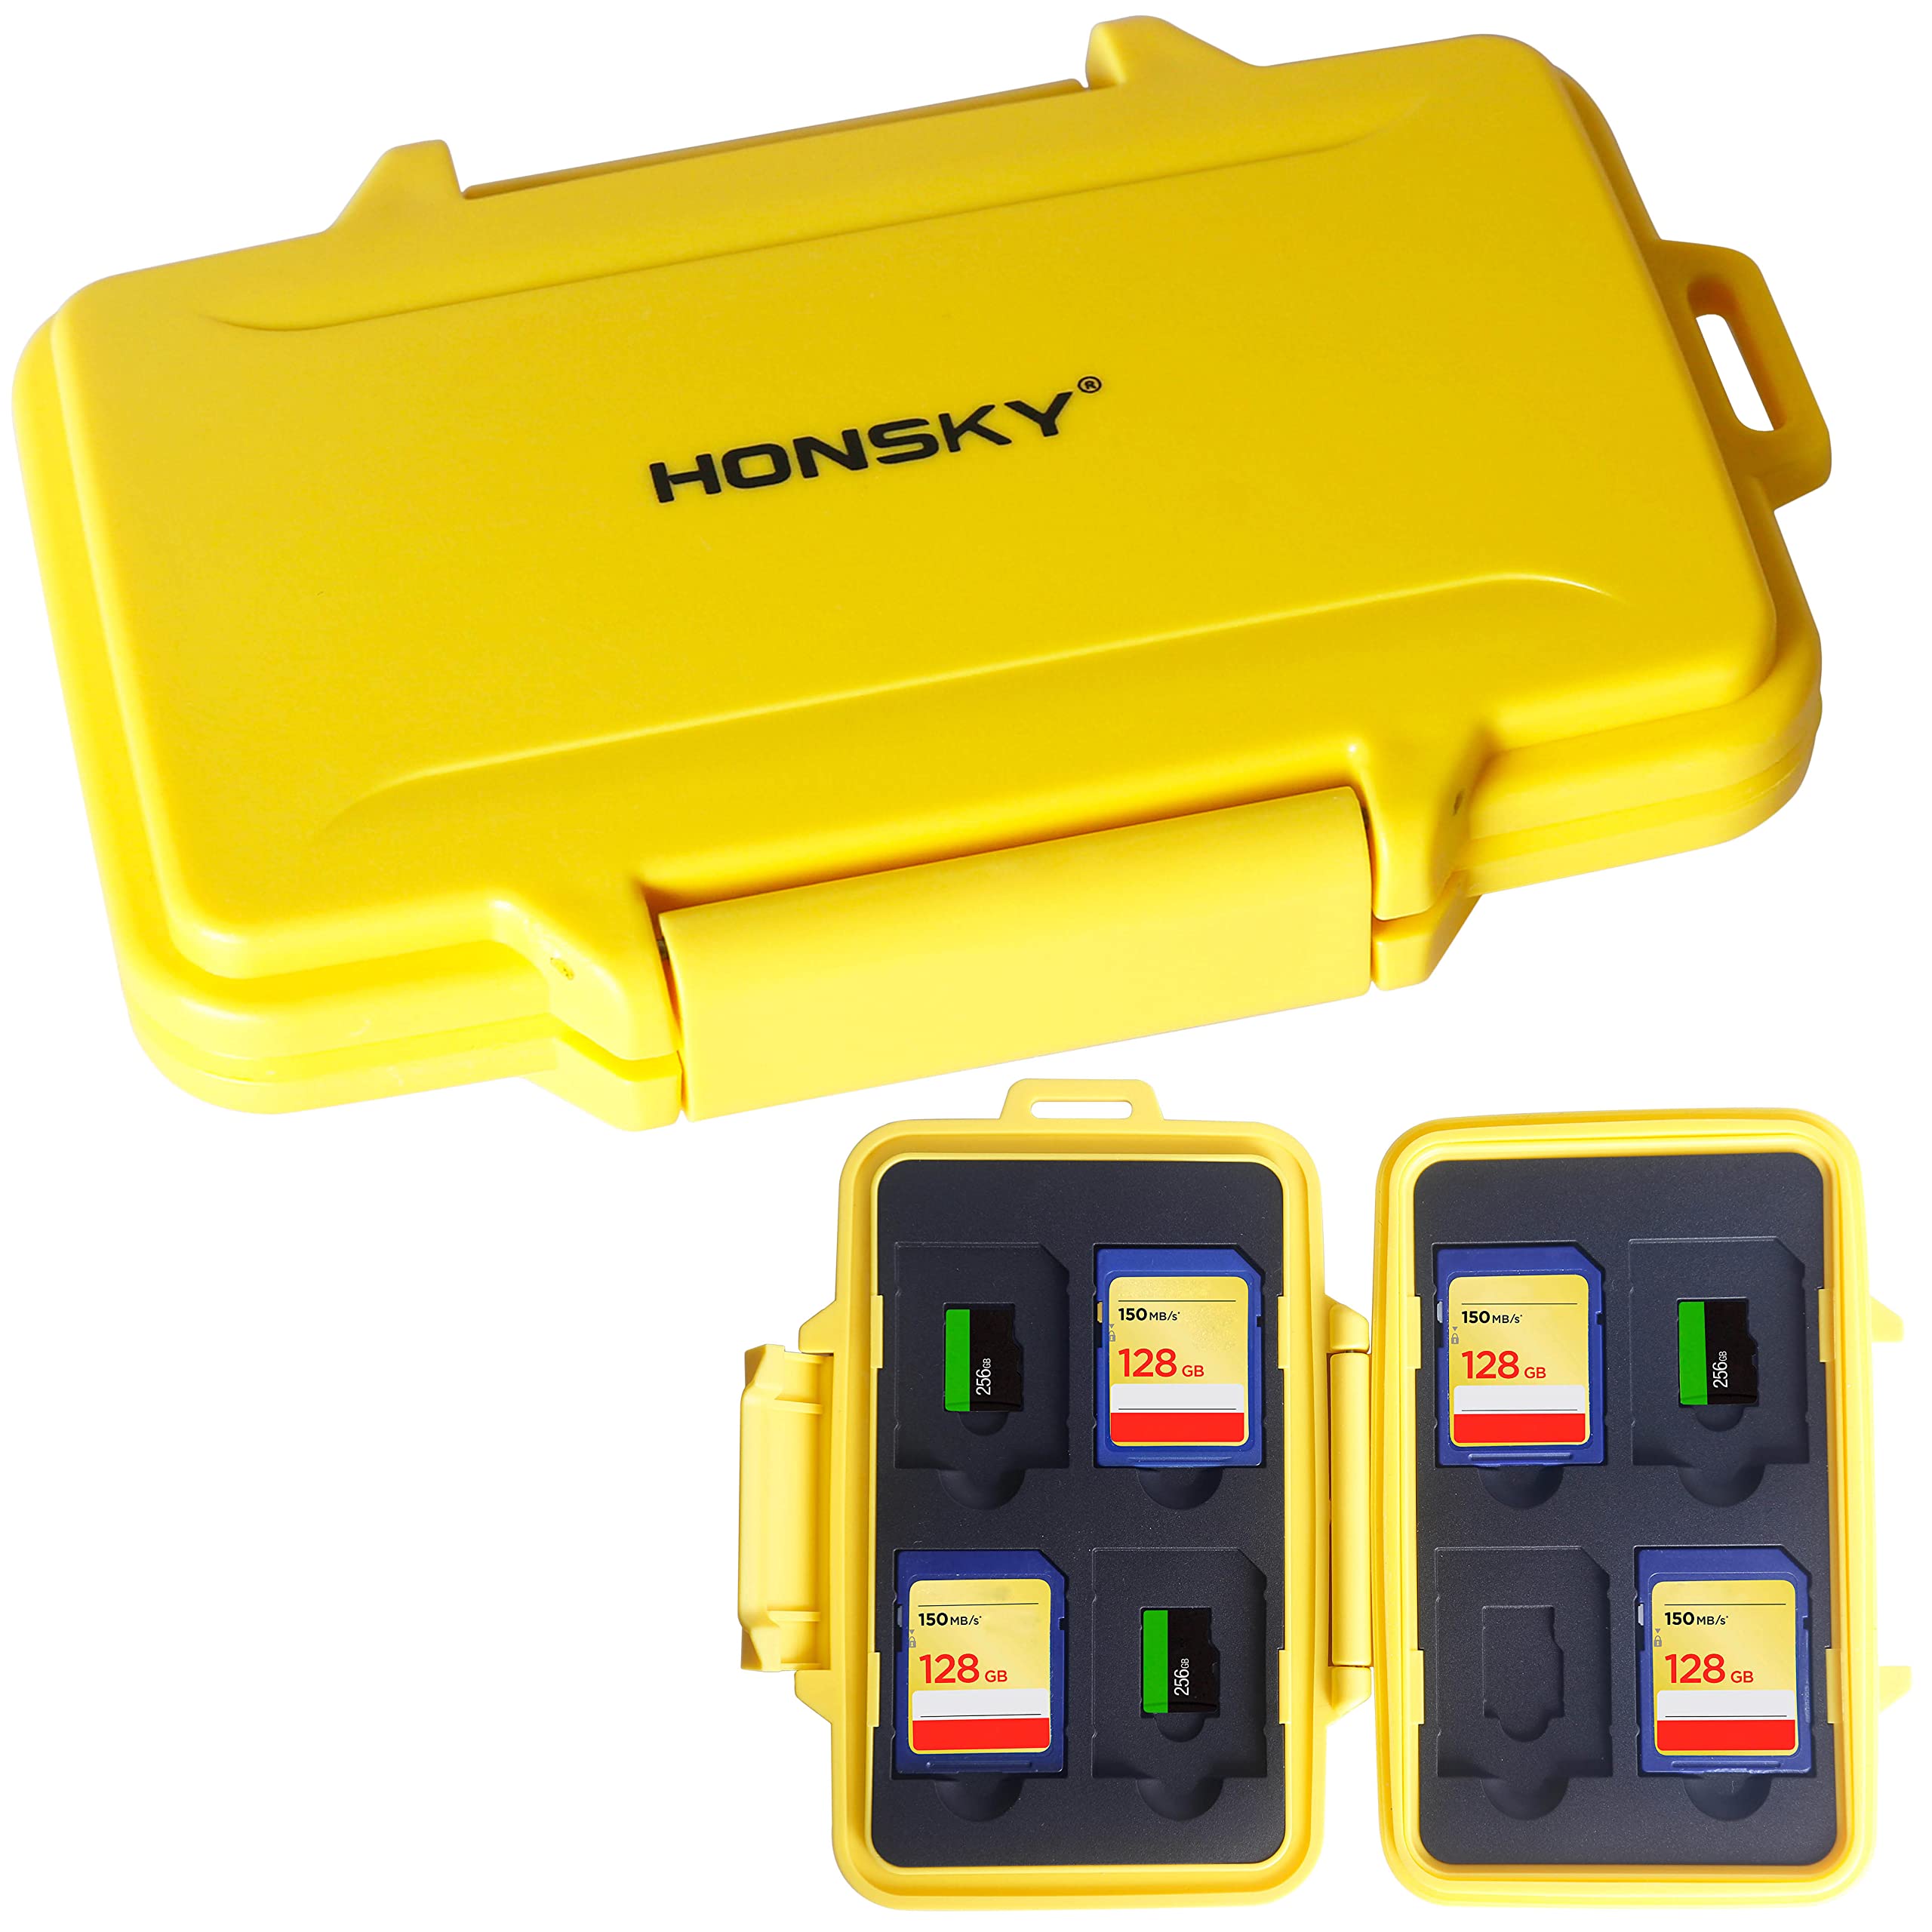 Book Cover SD Card Holder, Honsky Waterproof Memory Card Holder Case for SD Cards, Micro SD Cards, SDHC SDXC, Yellow